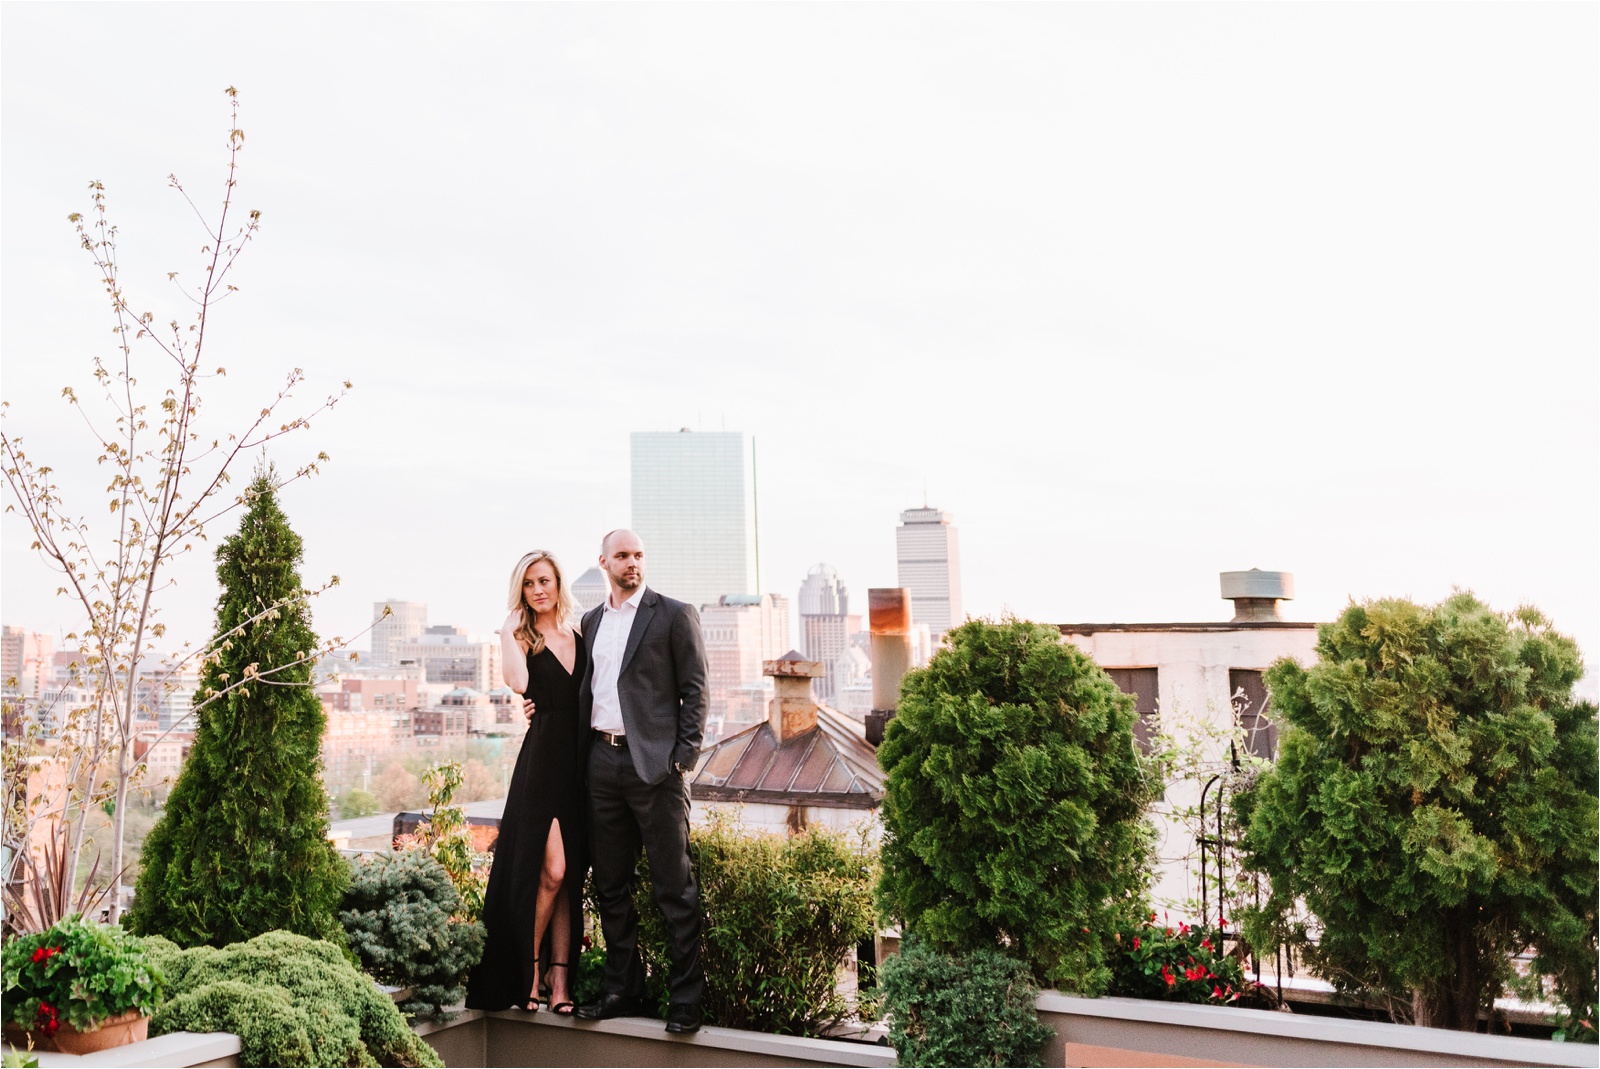 Chic & Stylish Rooftop Engagement Session at Seaport District, Beacon Hill, & XV Beacon in Boston, MA by Boston Wedding Photographer Annmarie Swift